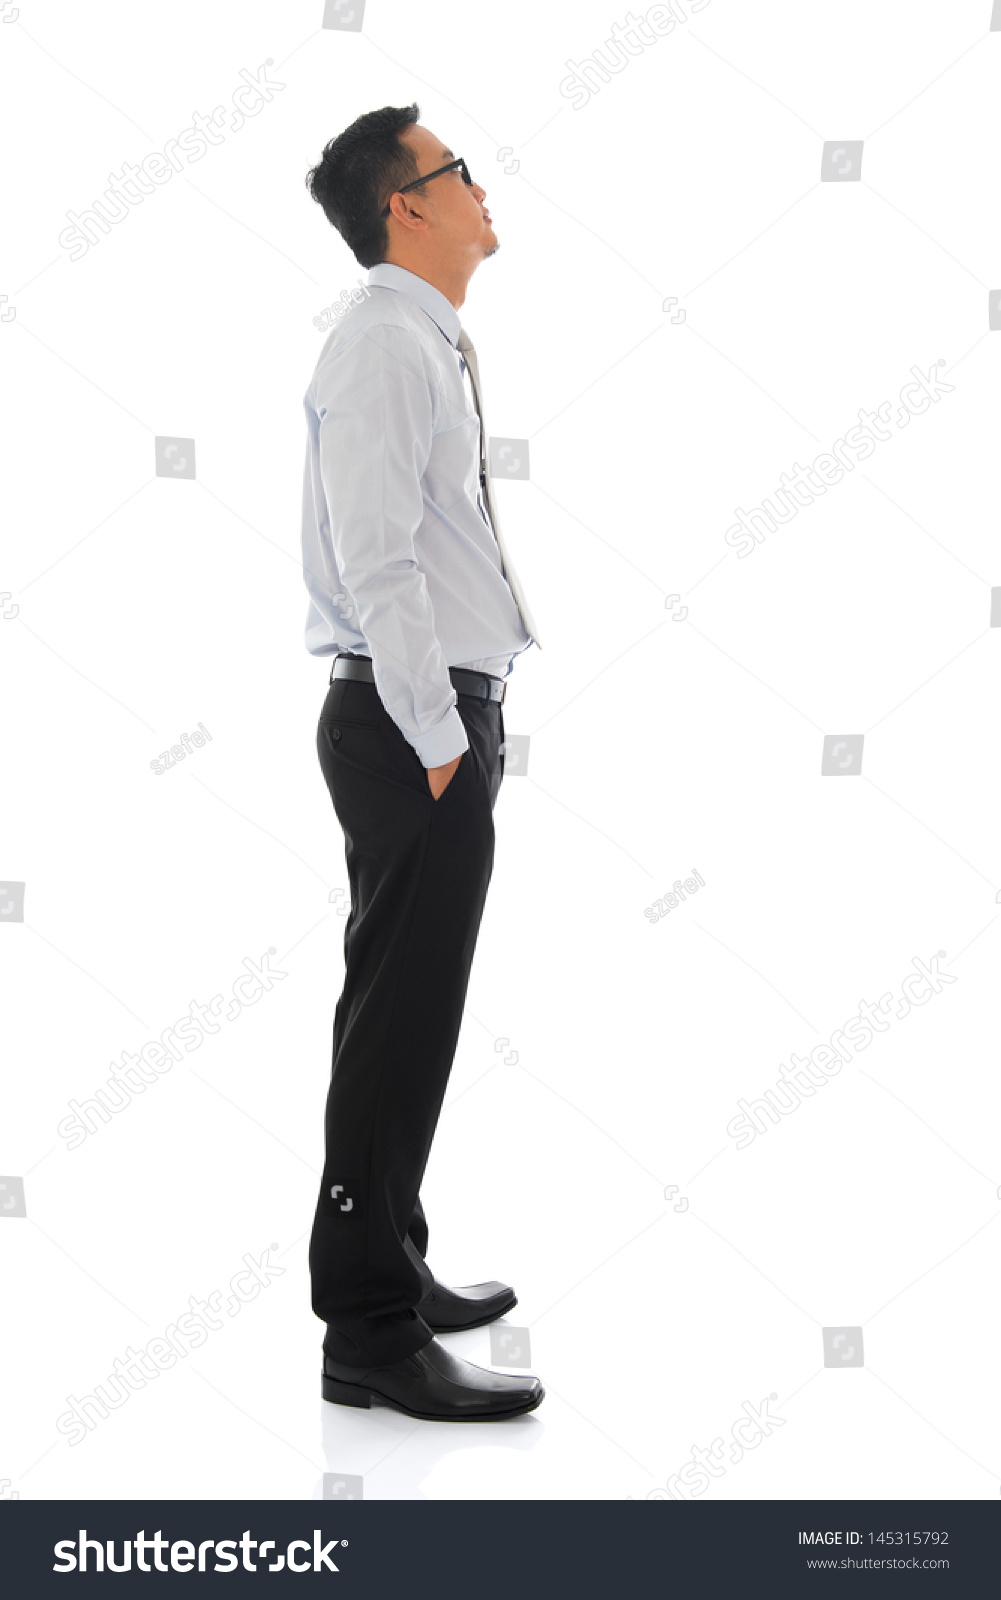 Full Body Young Asian Businessman Side Stock Photo 145315792 - Shutterstock